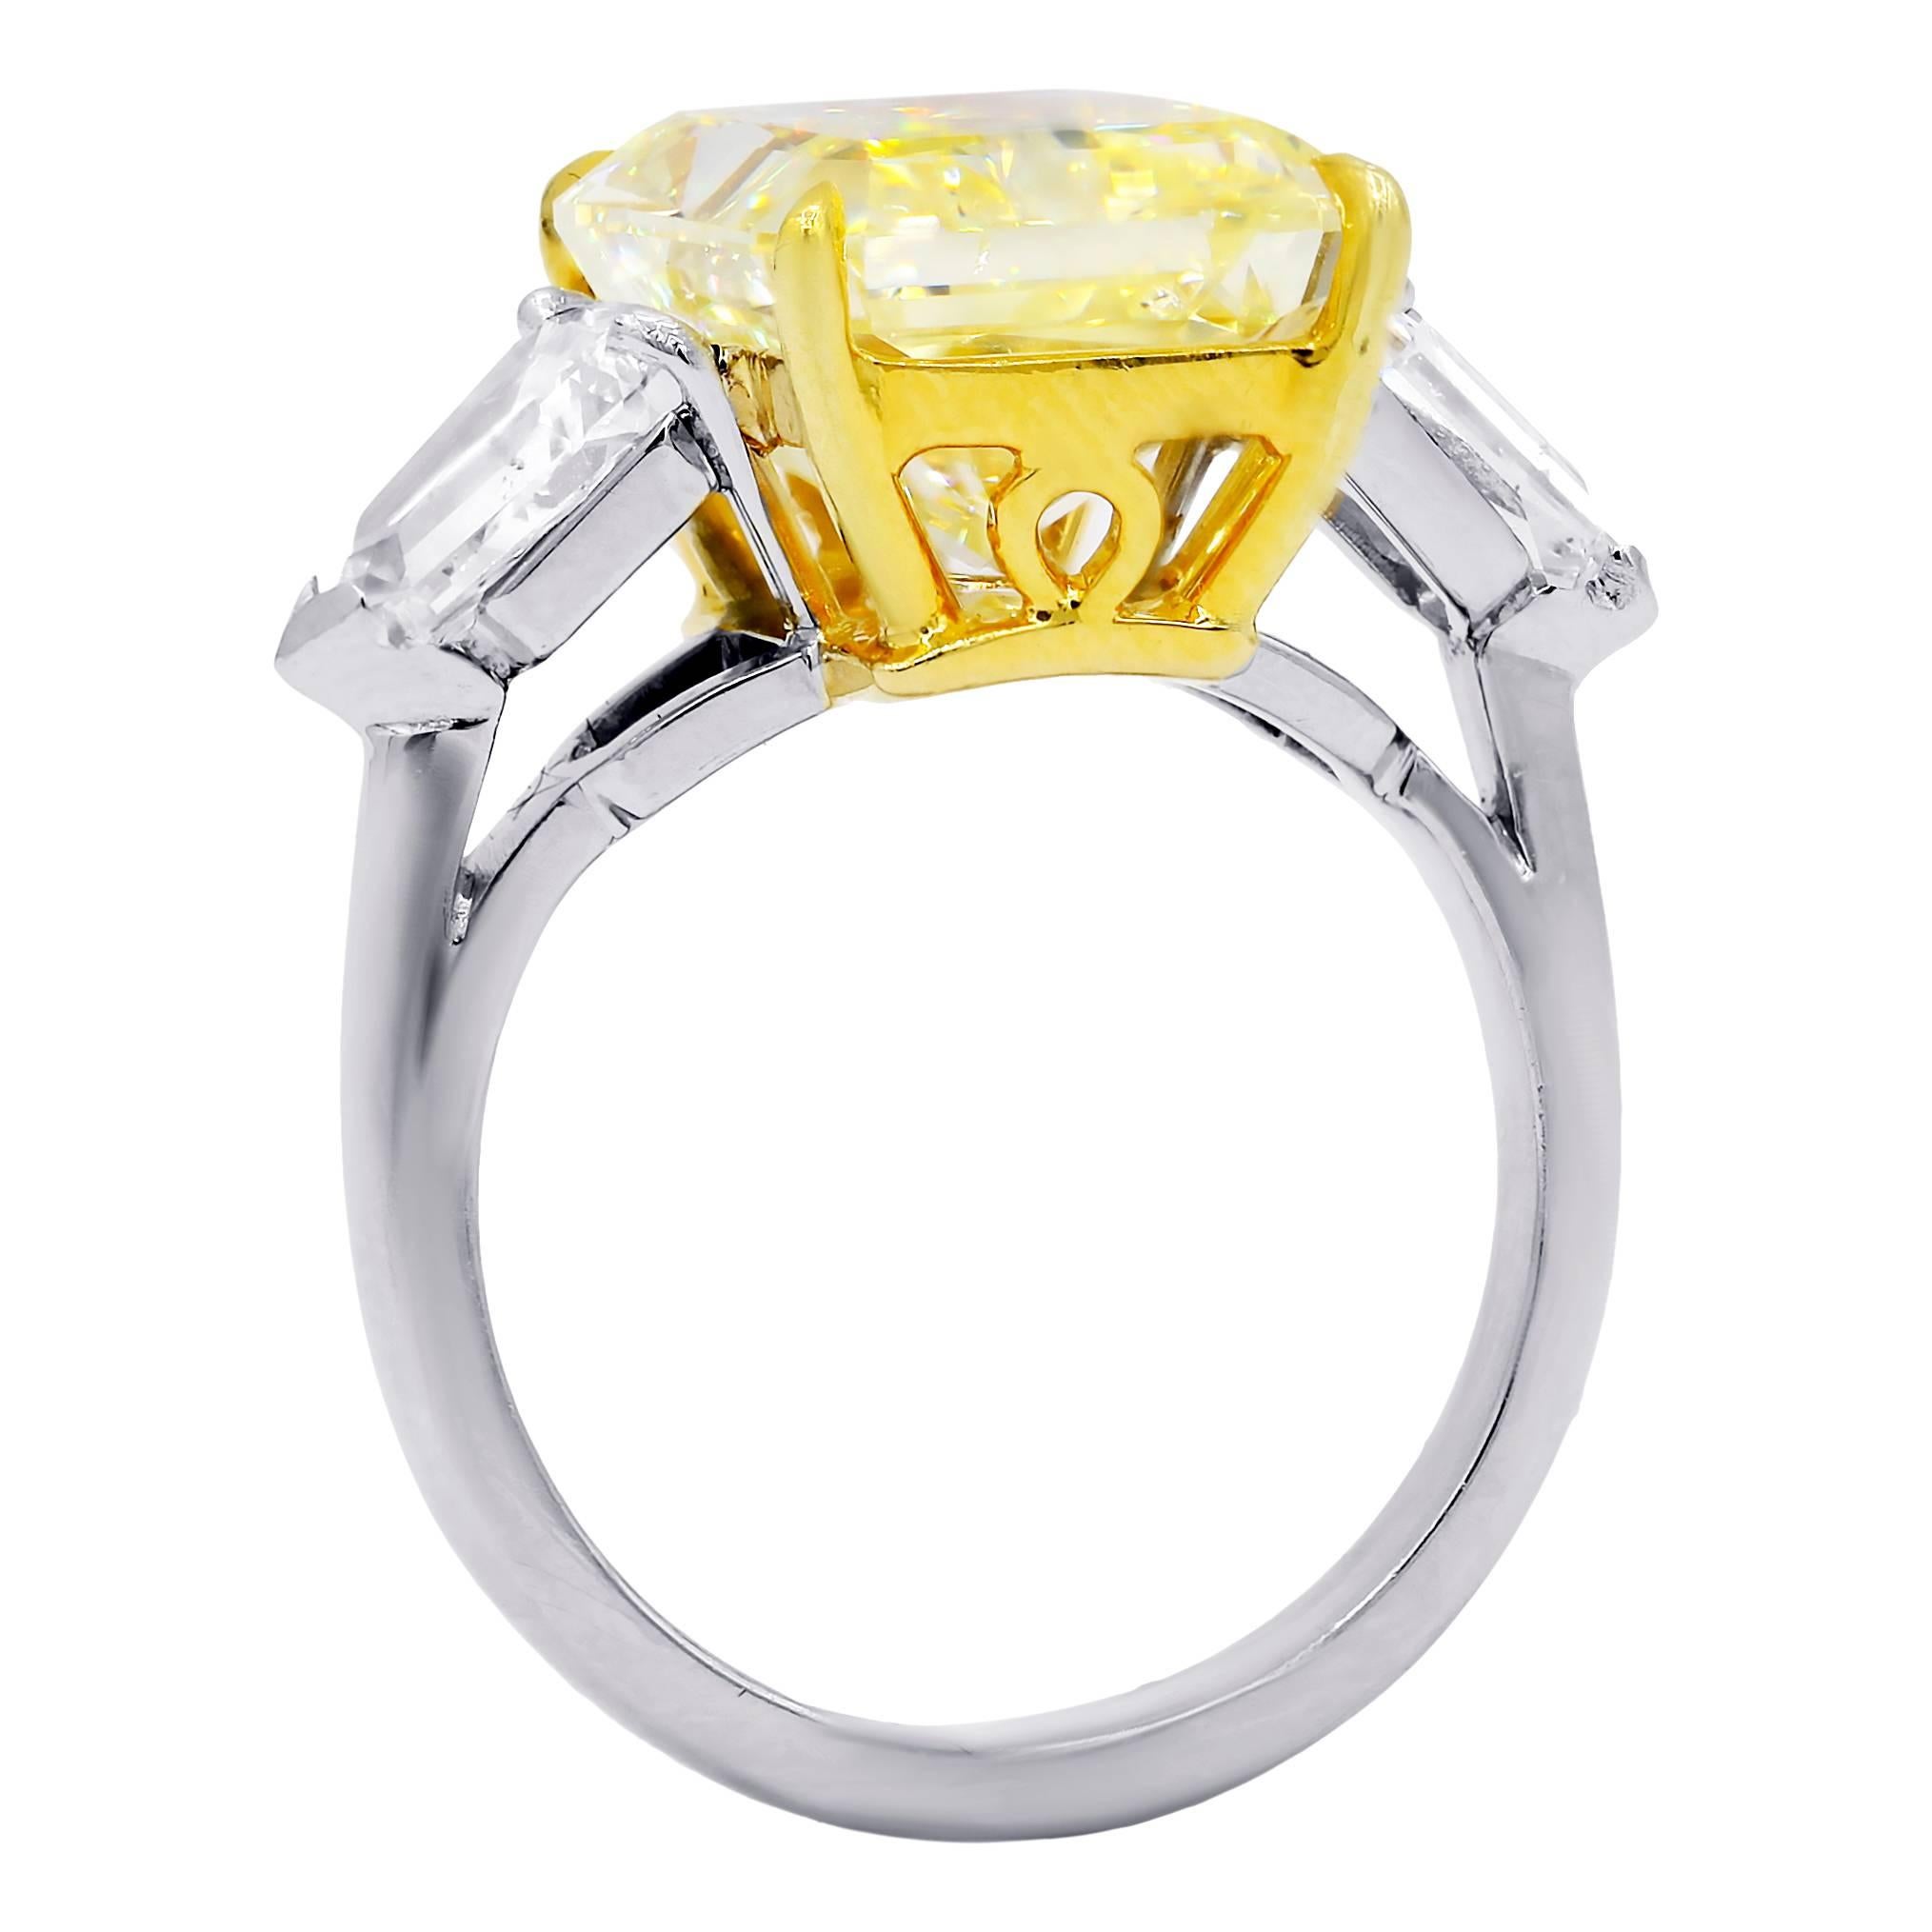 Magnificent Three stone Canary Yellow Diamond ring, features 10.15 carats Fancy Yellow, SI2 in Clarity. 100% Eye clean no visible inclusions. Set with 1.80 Carats of Bullets in Platinum GIA #17480434

